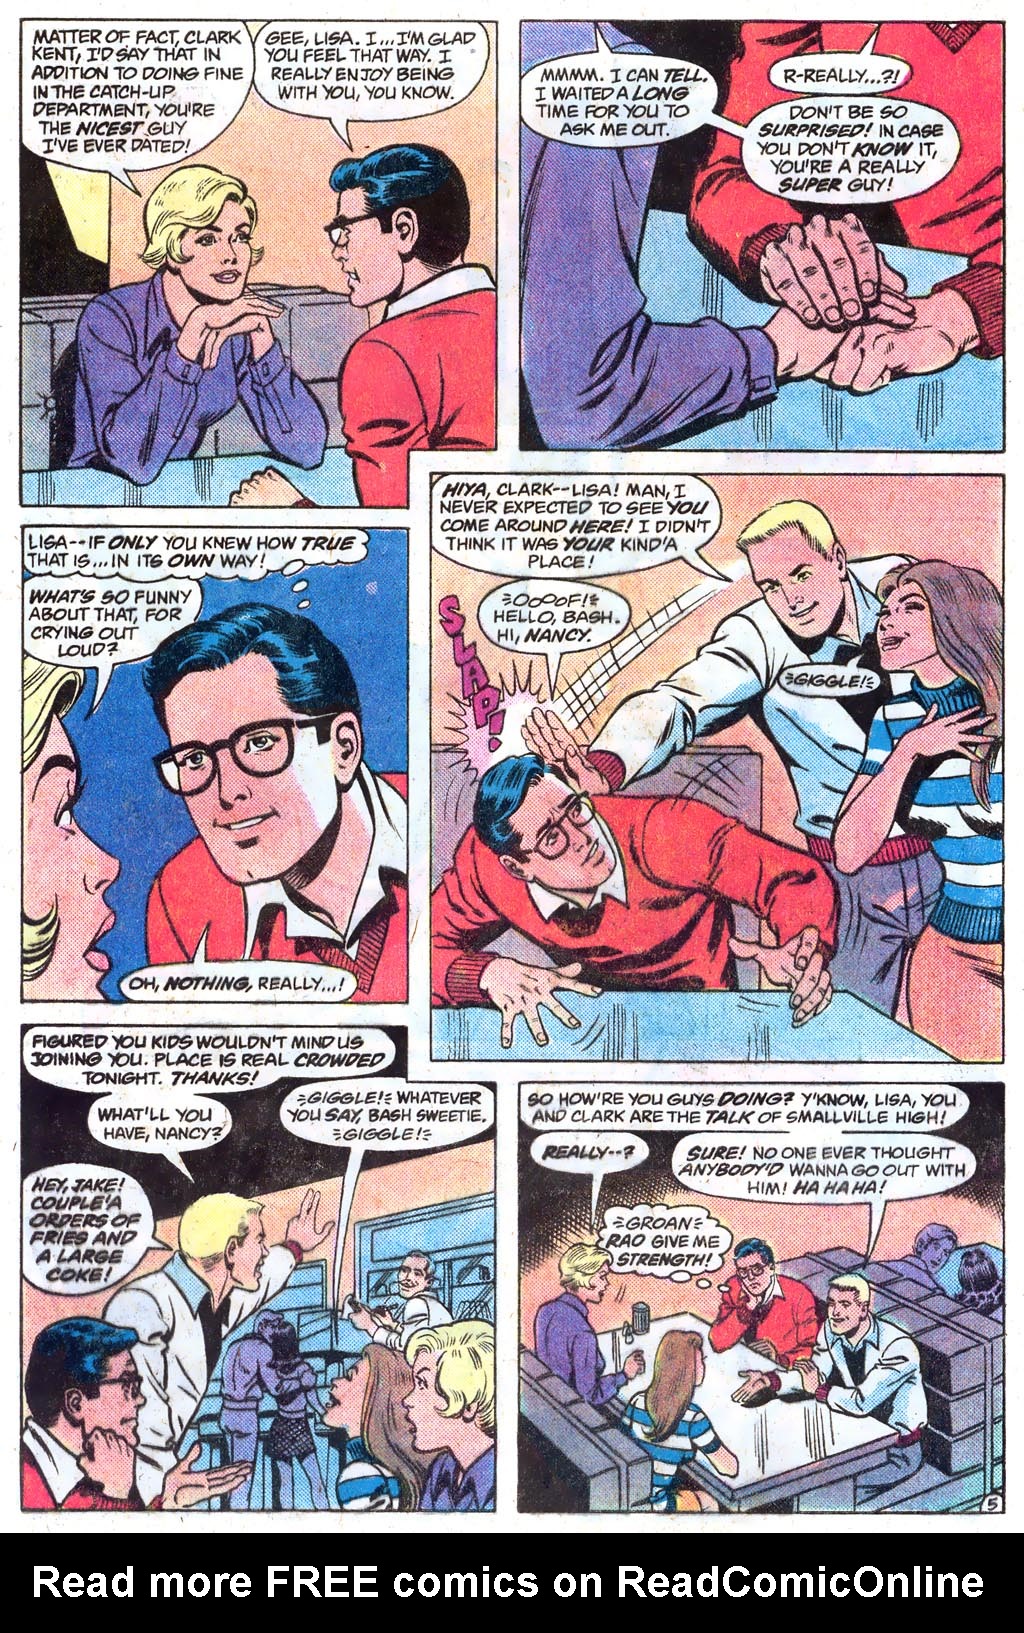 The New Adventures of Superboy 45 Page 8